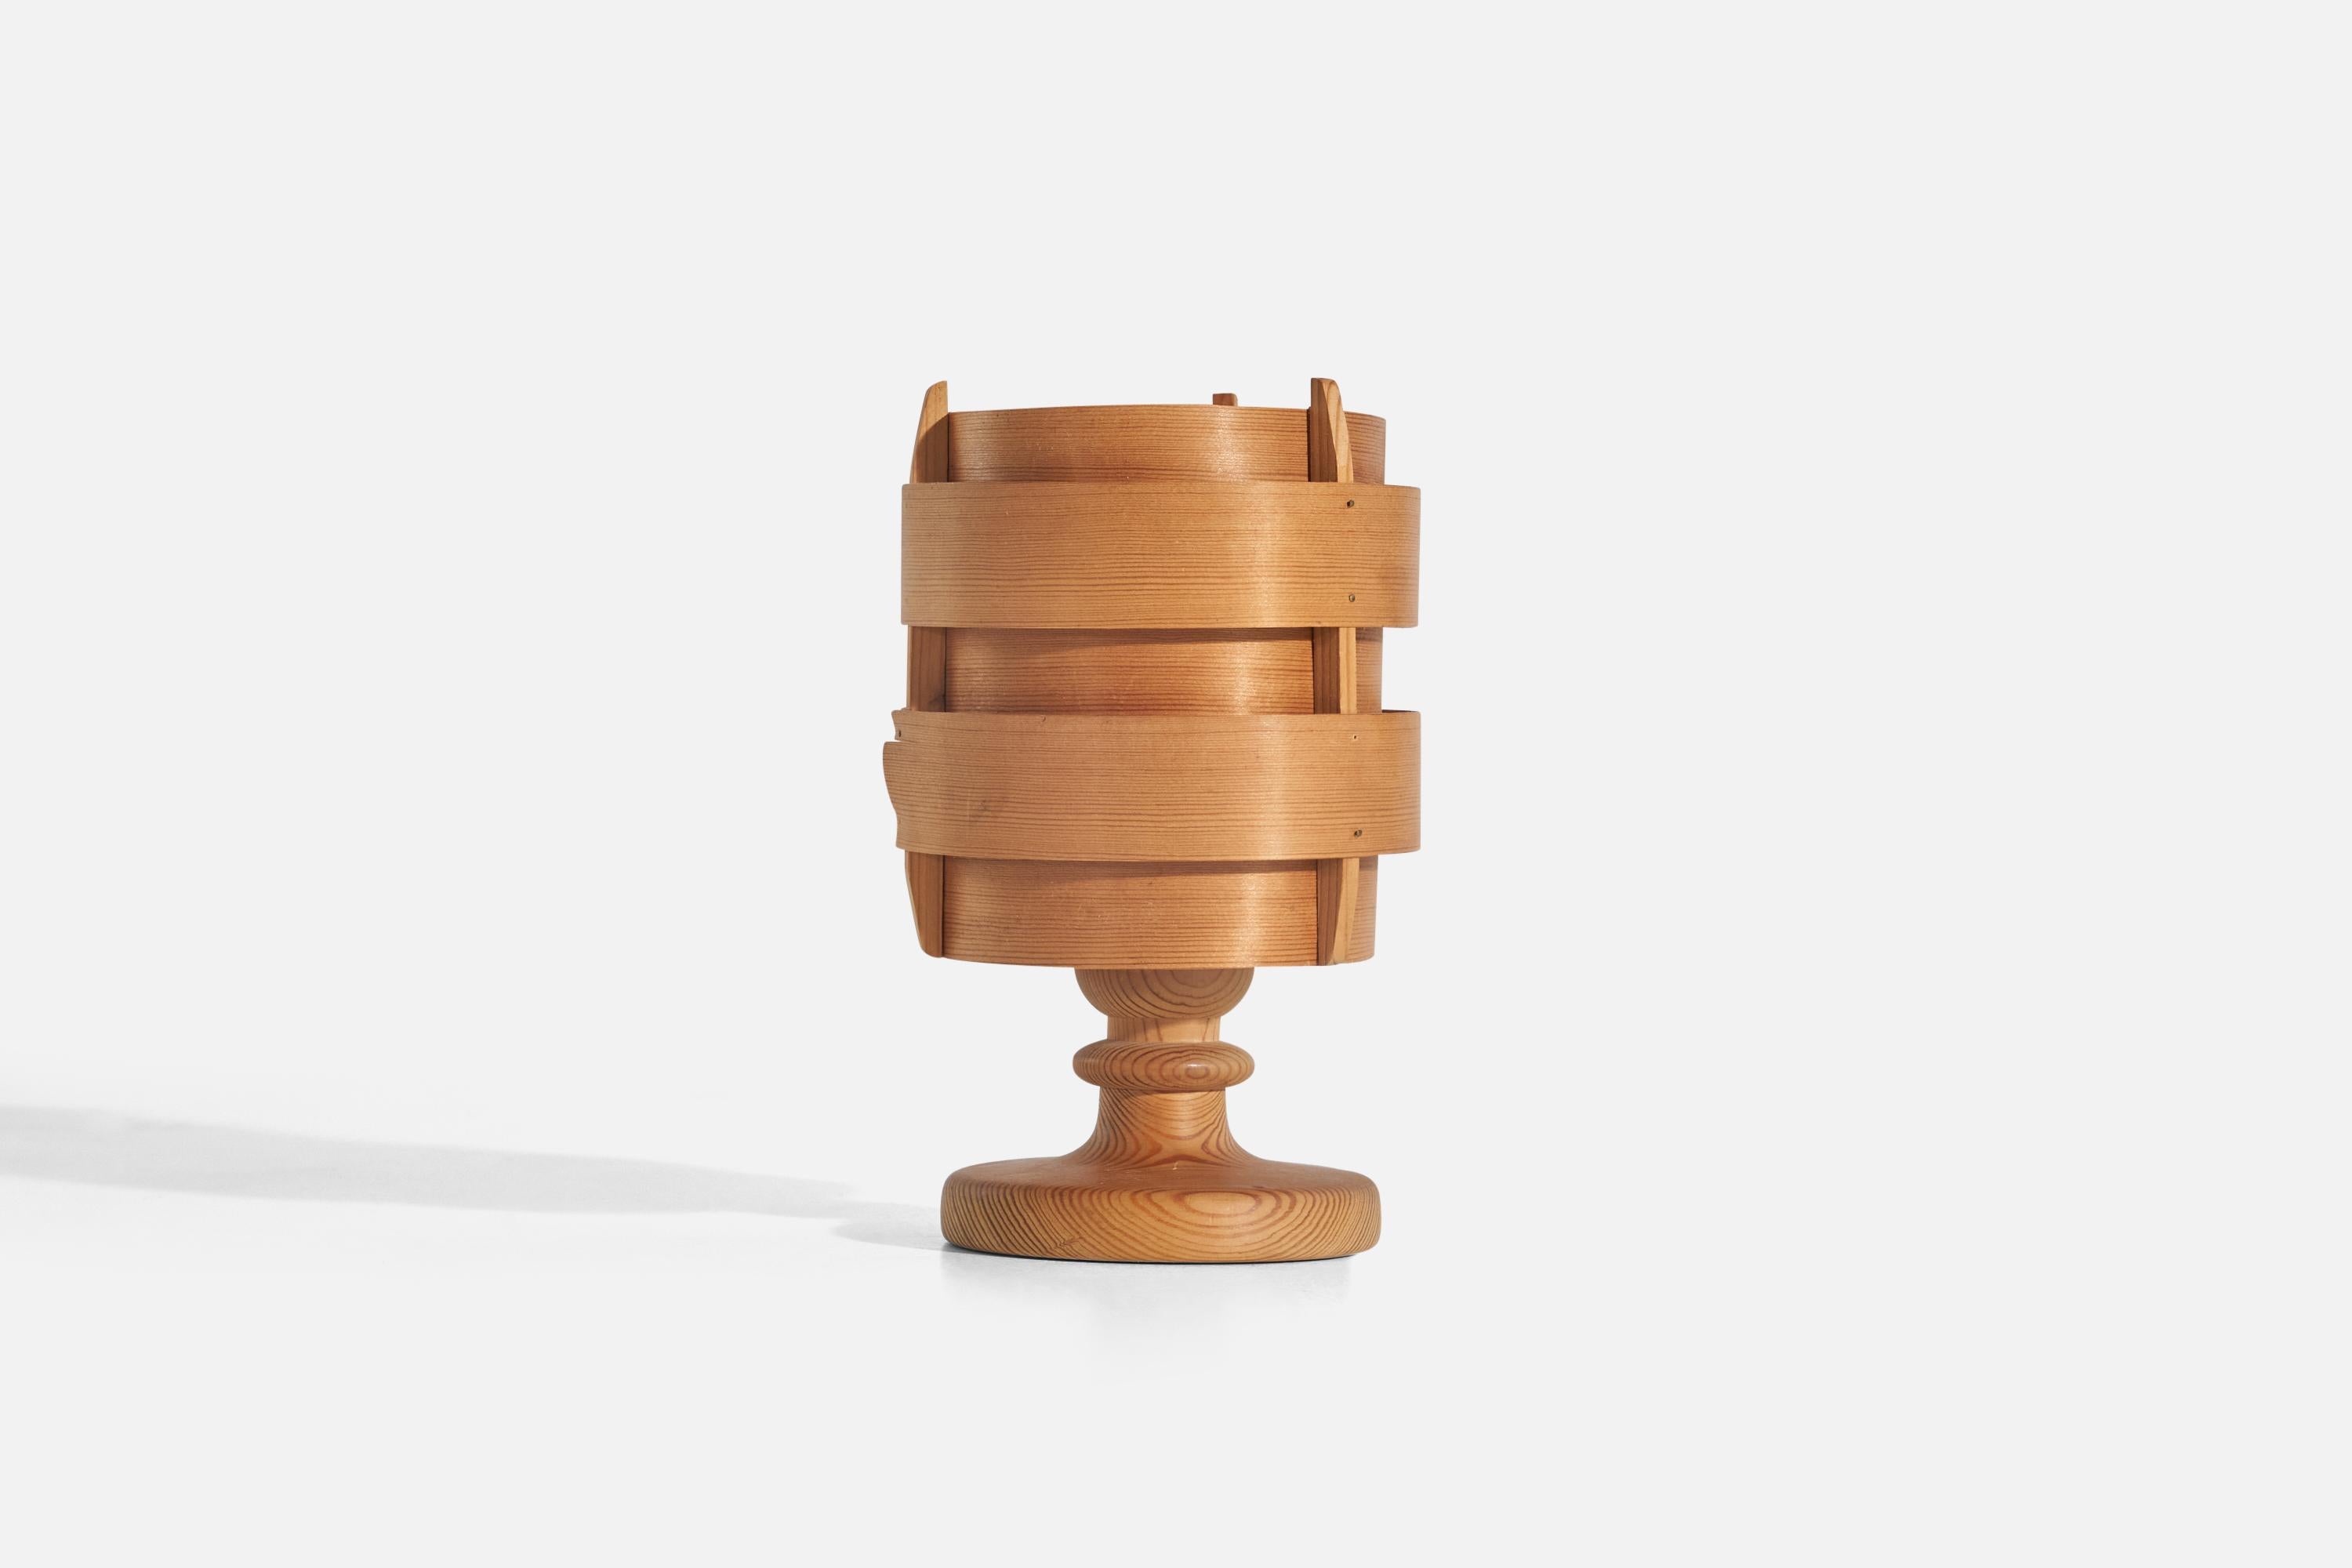 A pine and moulded pine veneer table lamp, designed and produced by Hans-Agne Jakobsson, Sweden, 1970s.

Socket takes standard E-26 medium base bulb.

There is no maximum wattage stated on the fixture.